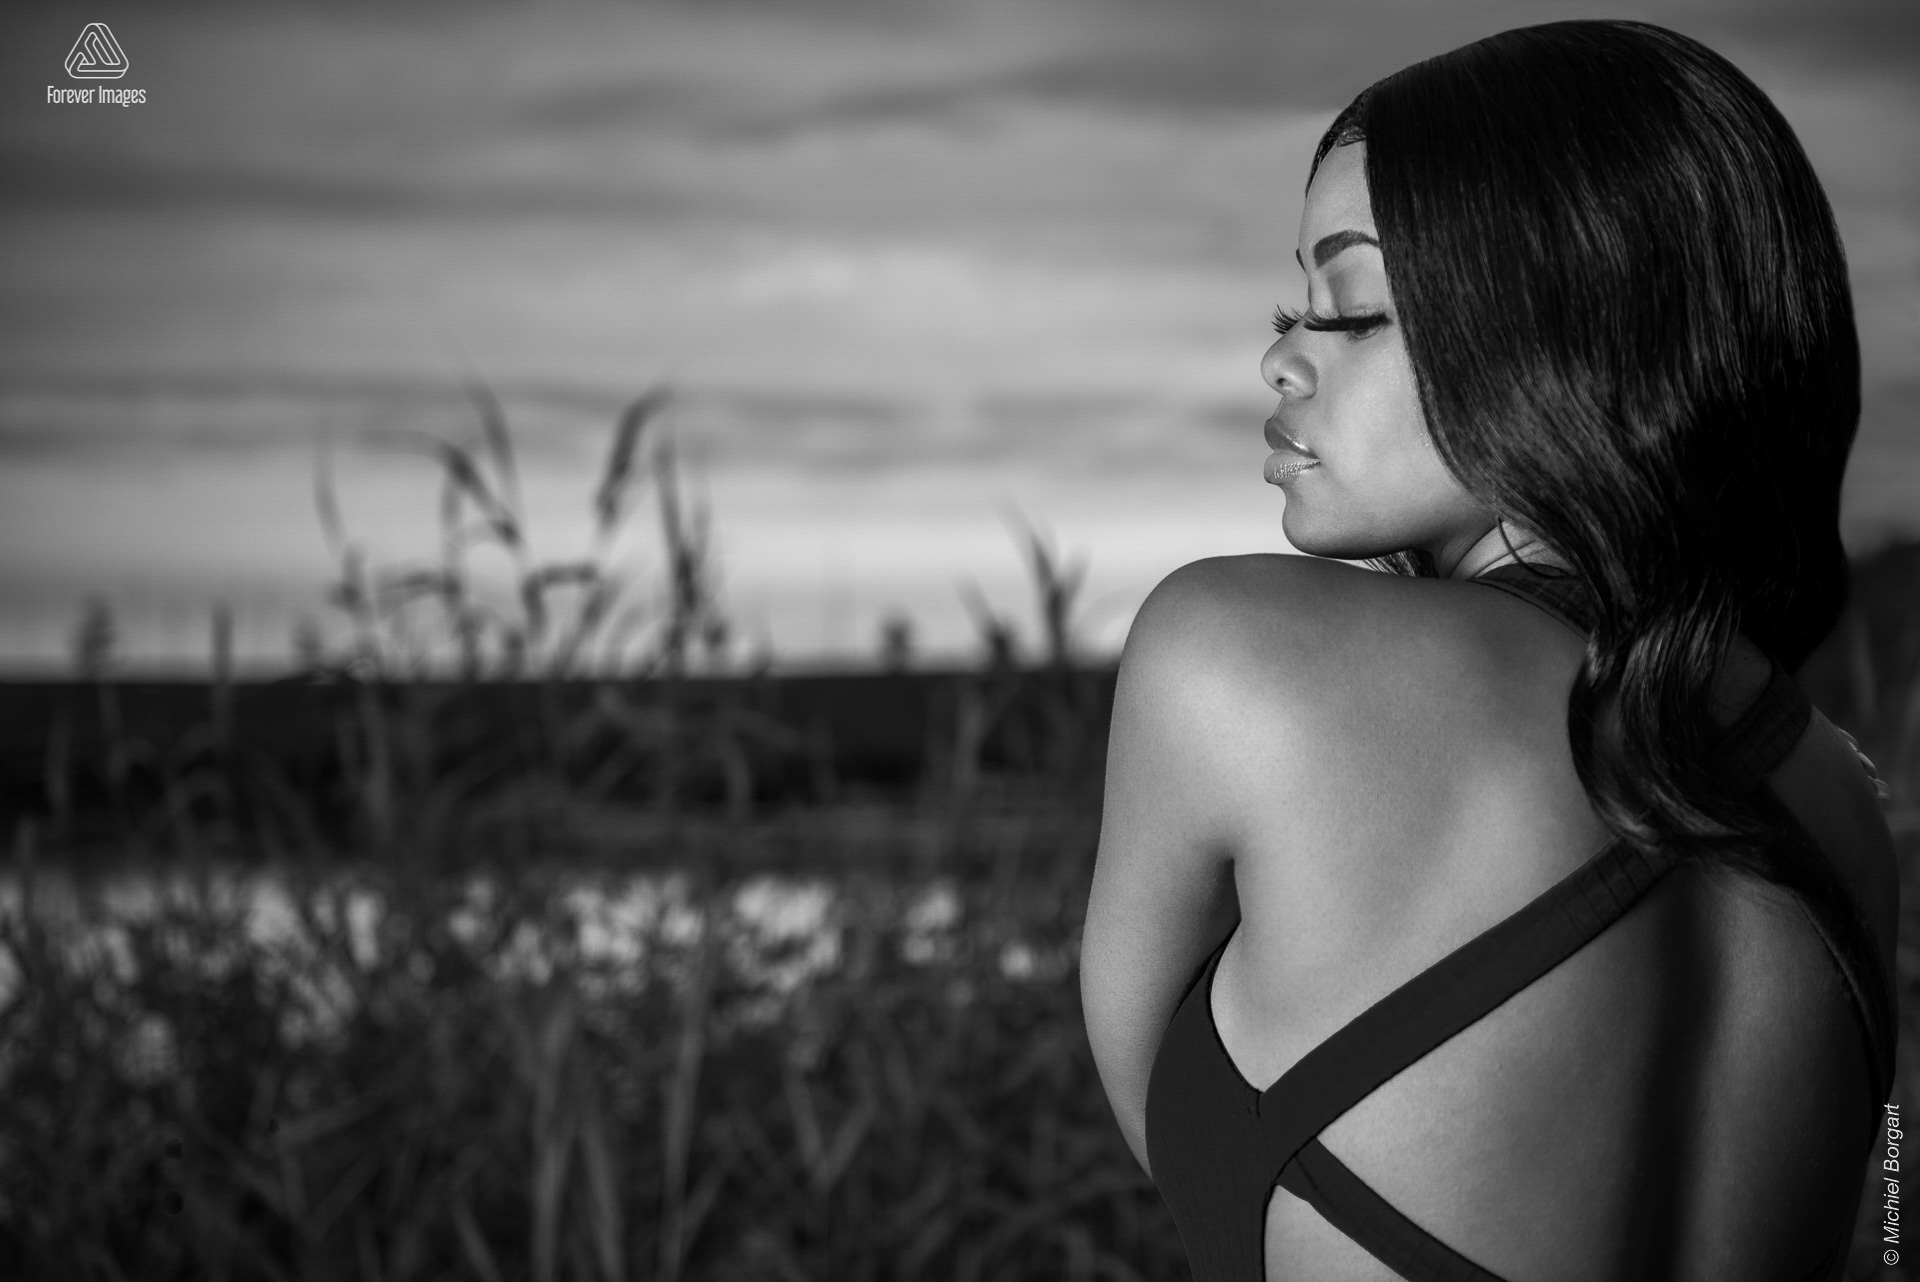 Portrait photo black and white B&W young lady dress open back grass and water | Mariangel Dolorita Diemer Polder | Portrait Photographer Michiel Borgart - Forever Images.